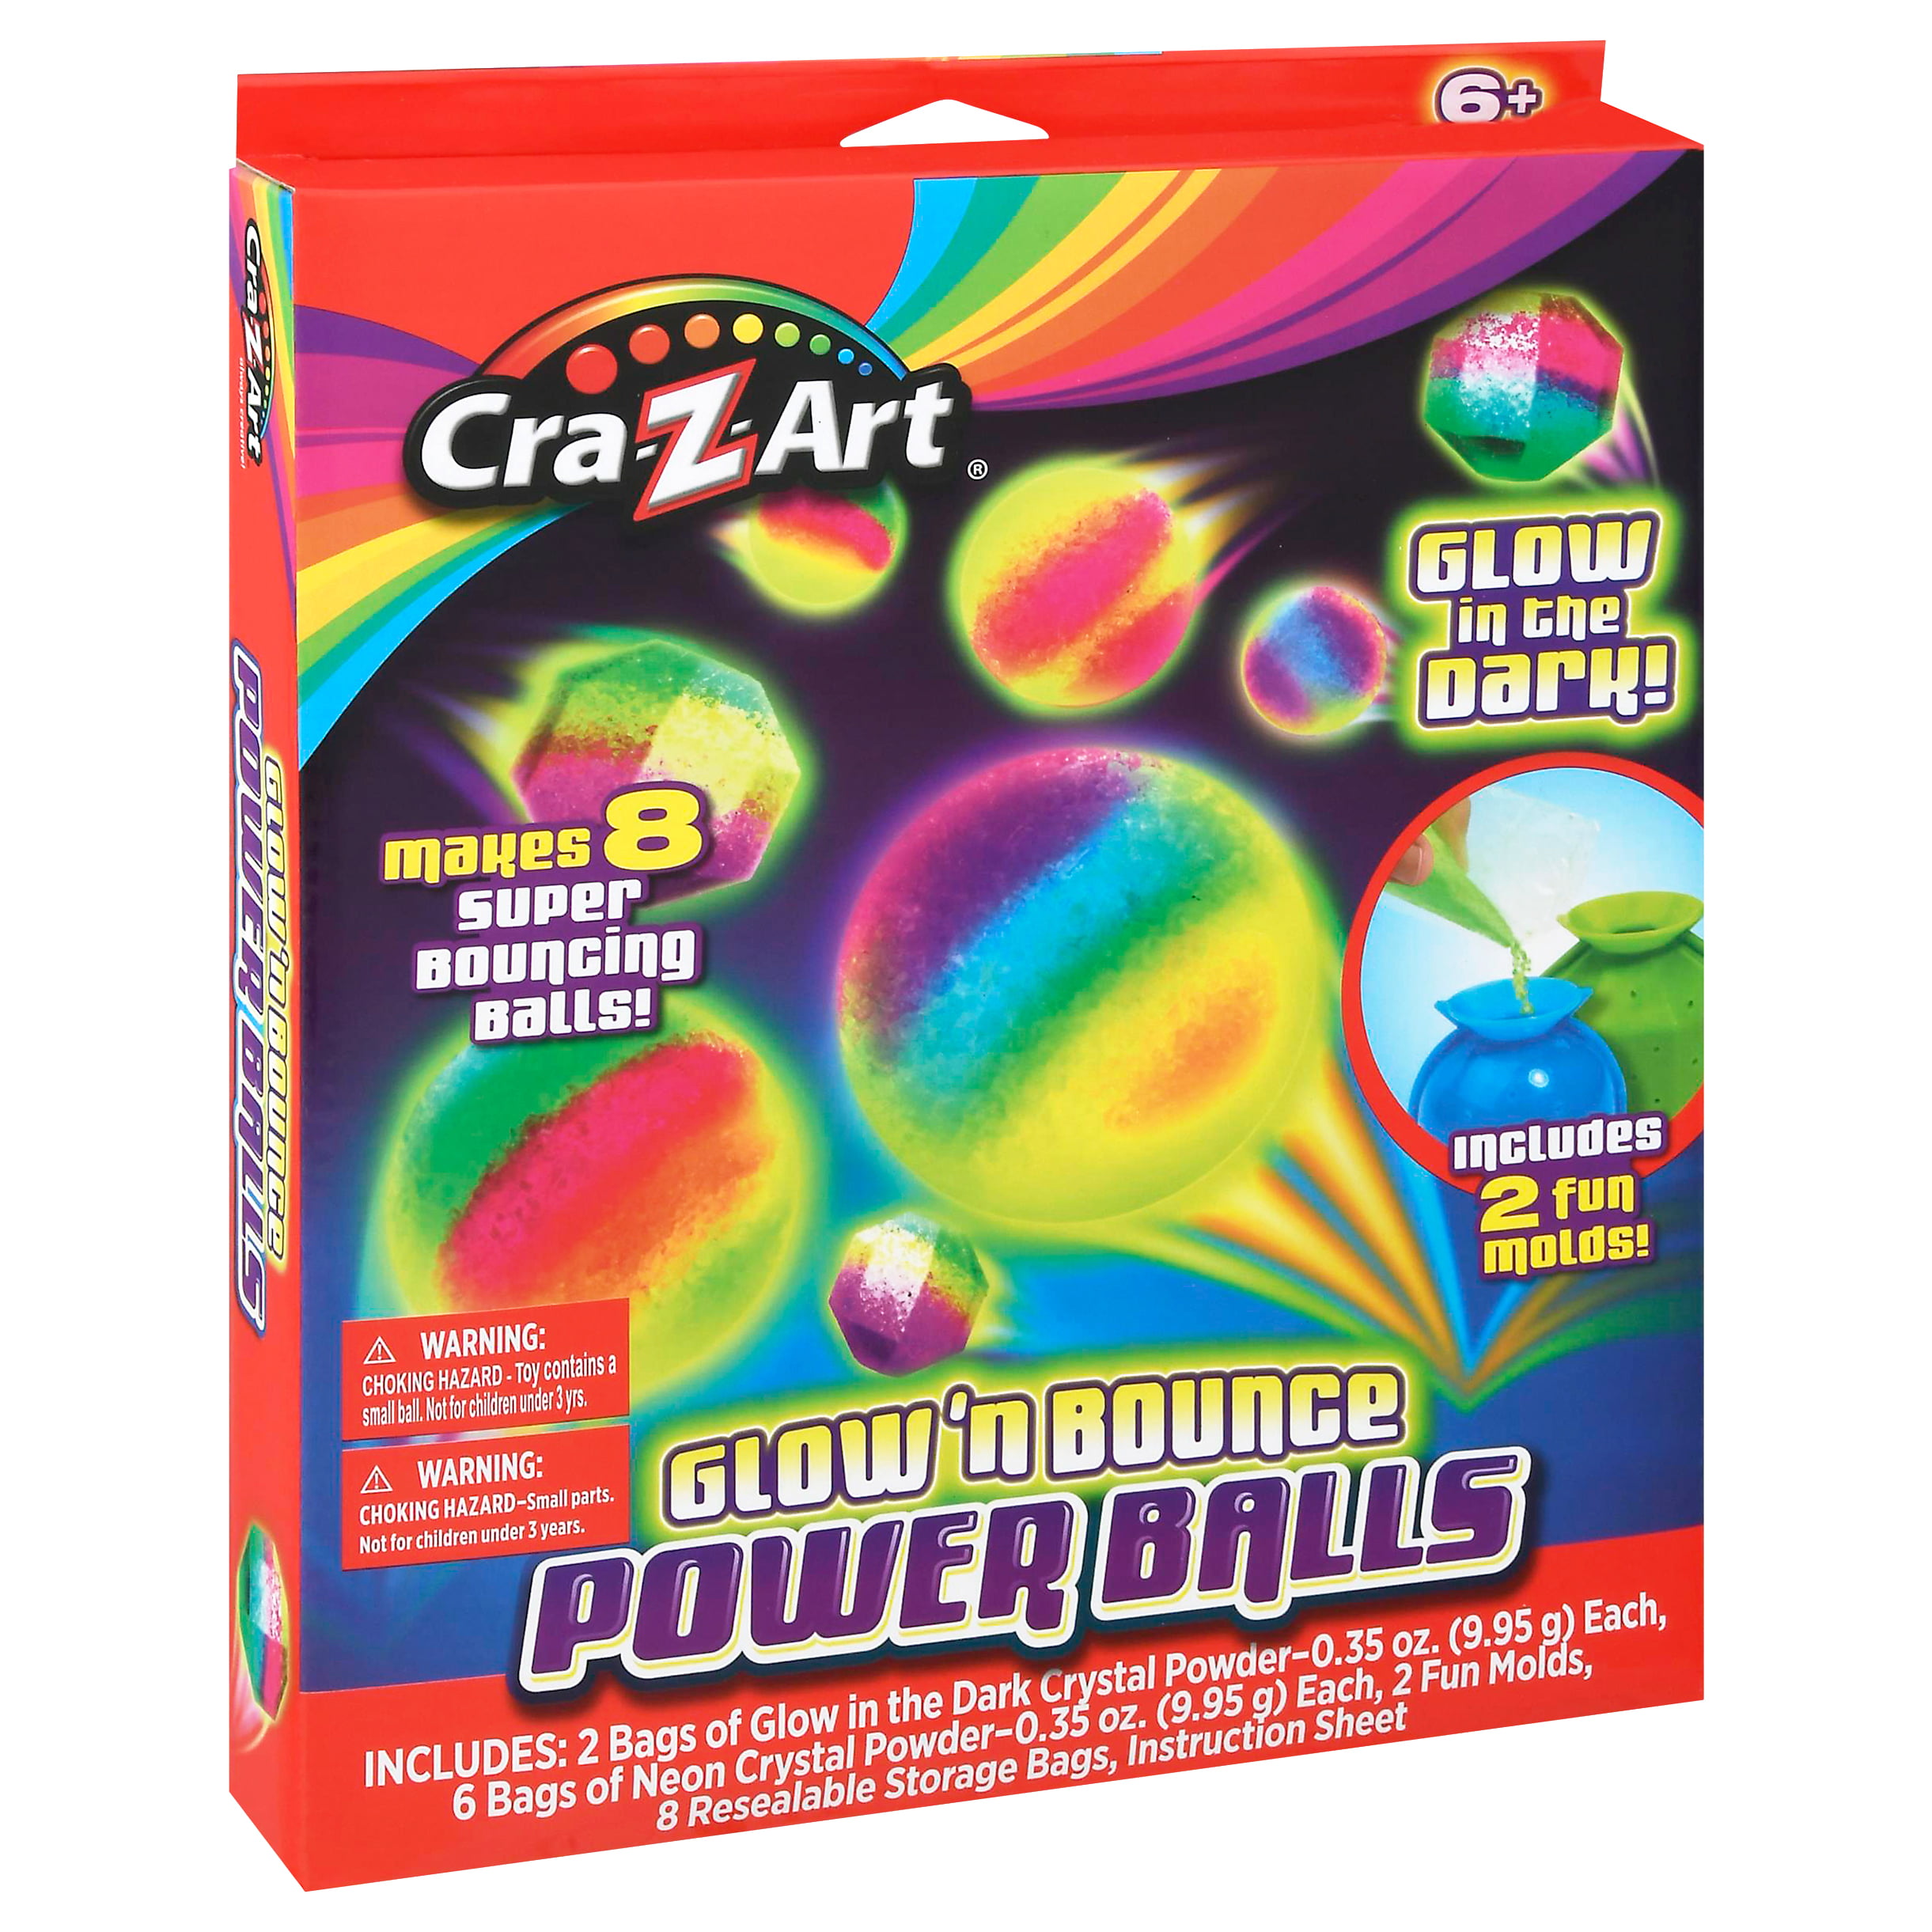 Details about   CraZart Xtreme Bounce Balls Glow In The Dark Makes 25 Bouncing Balls